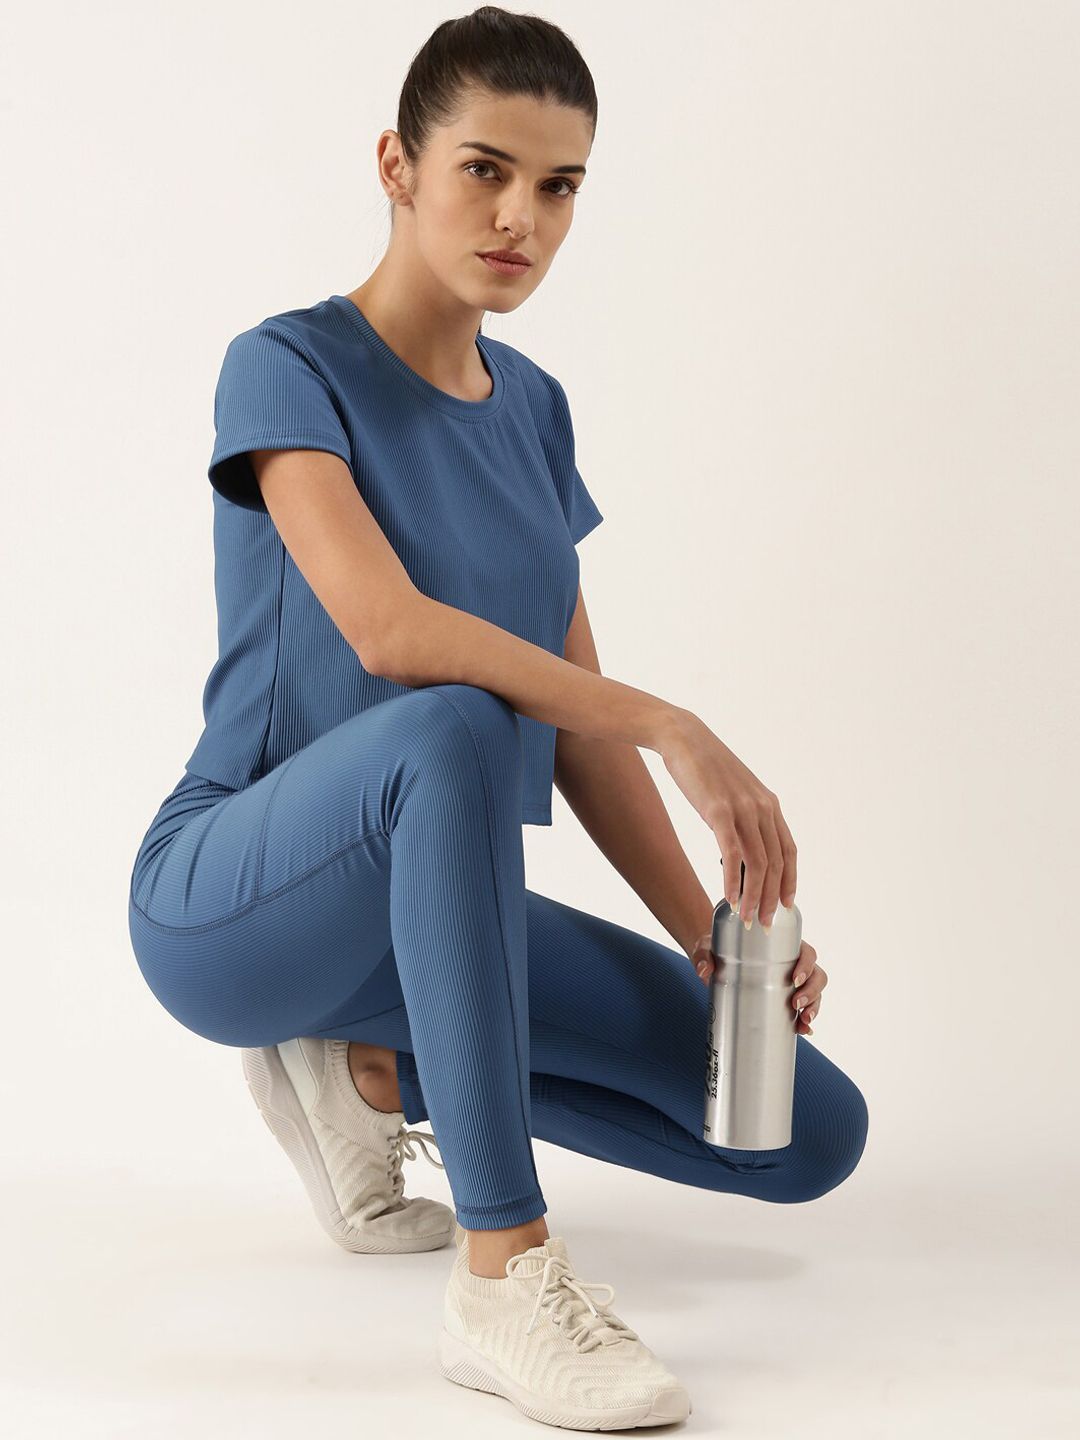 Bannos Swagger Women Blue Rapid-Dry Training or Gym Track Suit Price in India